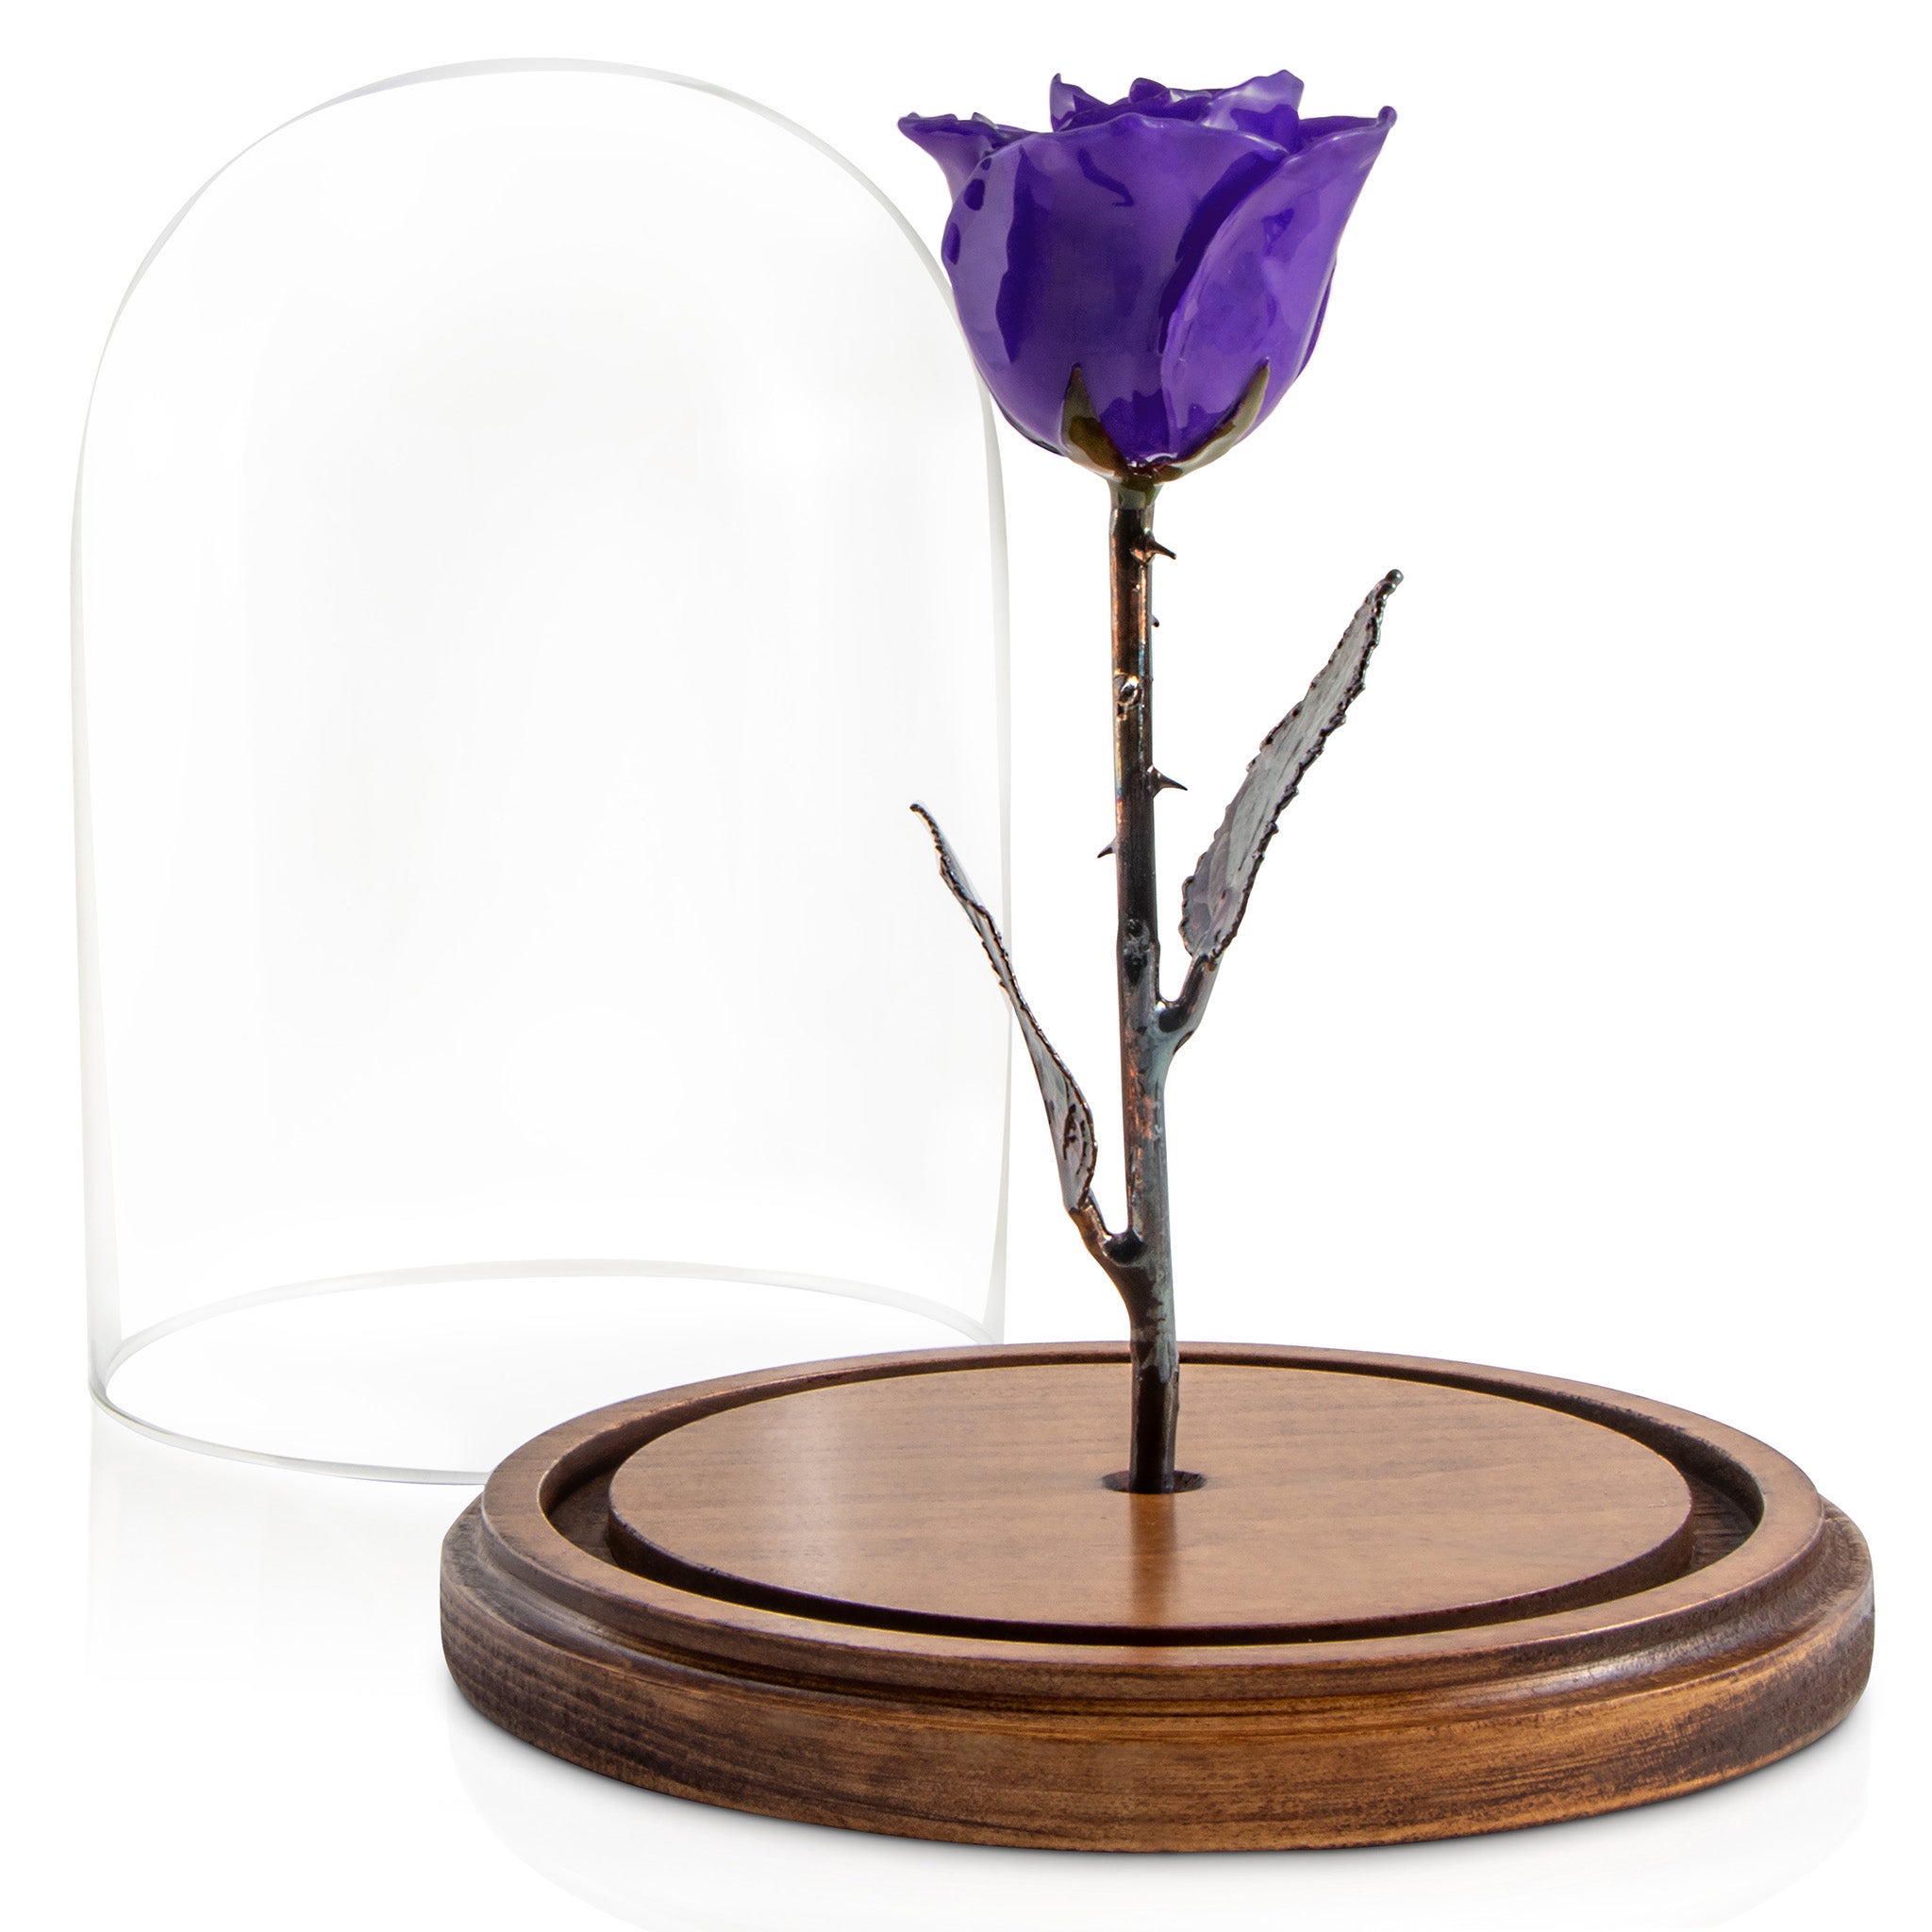 Purple Enchanted Rose (aka Beauty & The Beast Rose) with Patina Copper Stem Mounted to A Hand Turned Solid Wood Base under a glass dome. View with dome off.